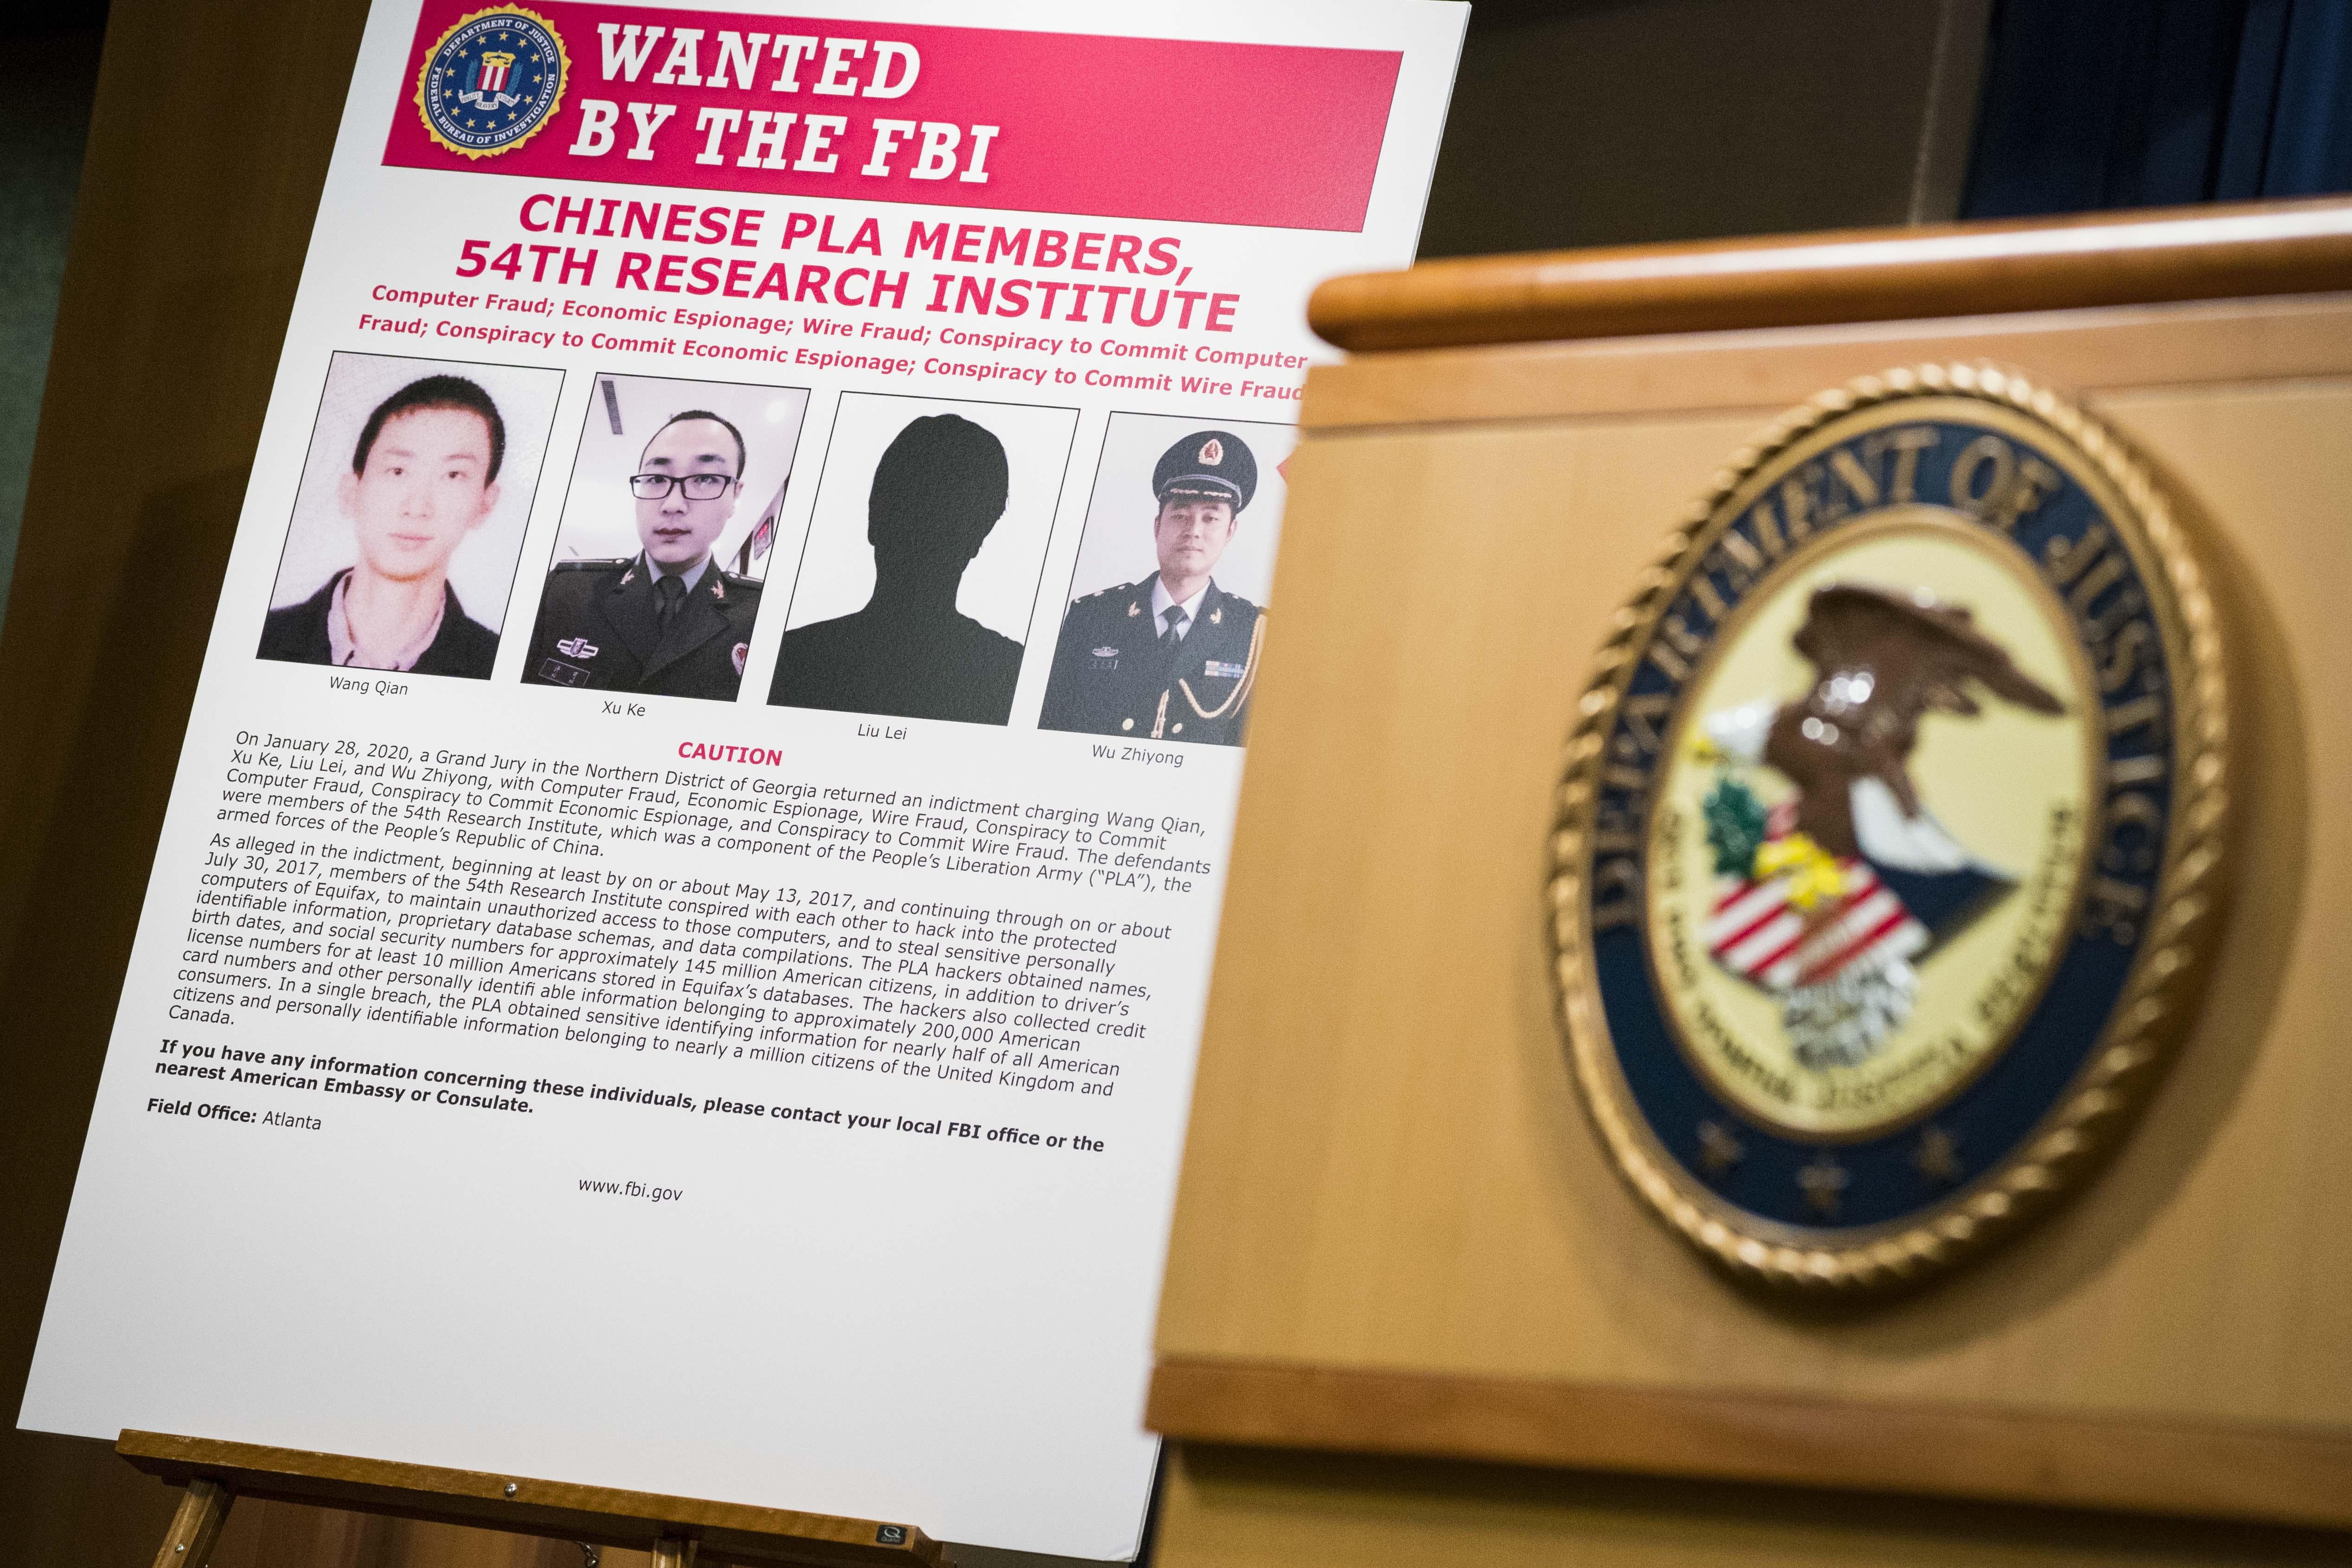 A sign that says "Wanted by the FBI" identifying four PLA members, next to a podium with the DOJ seal.